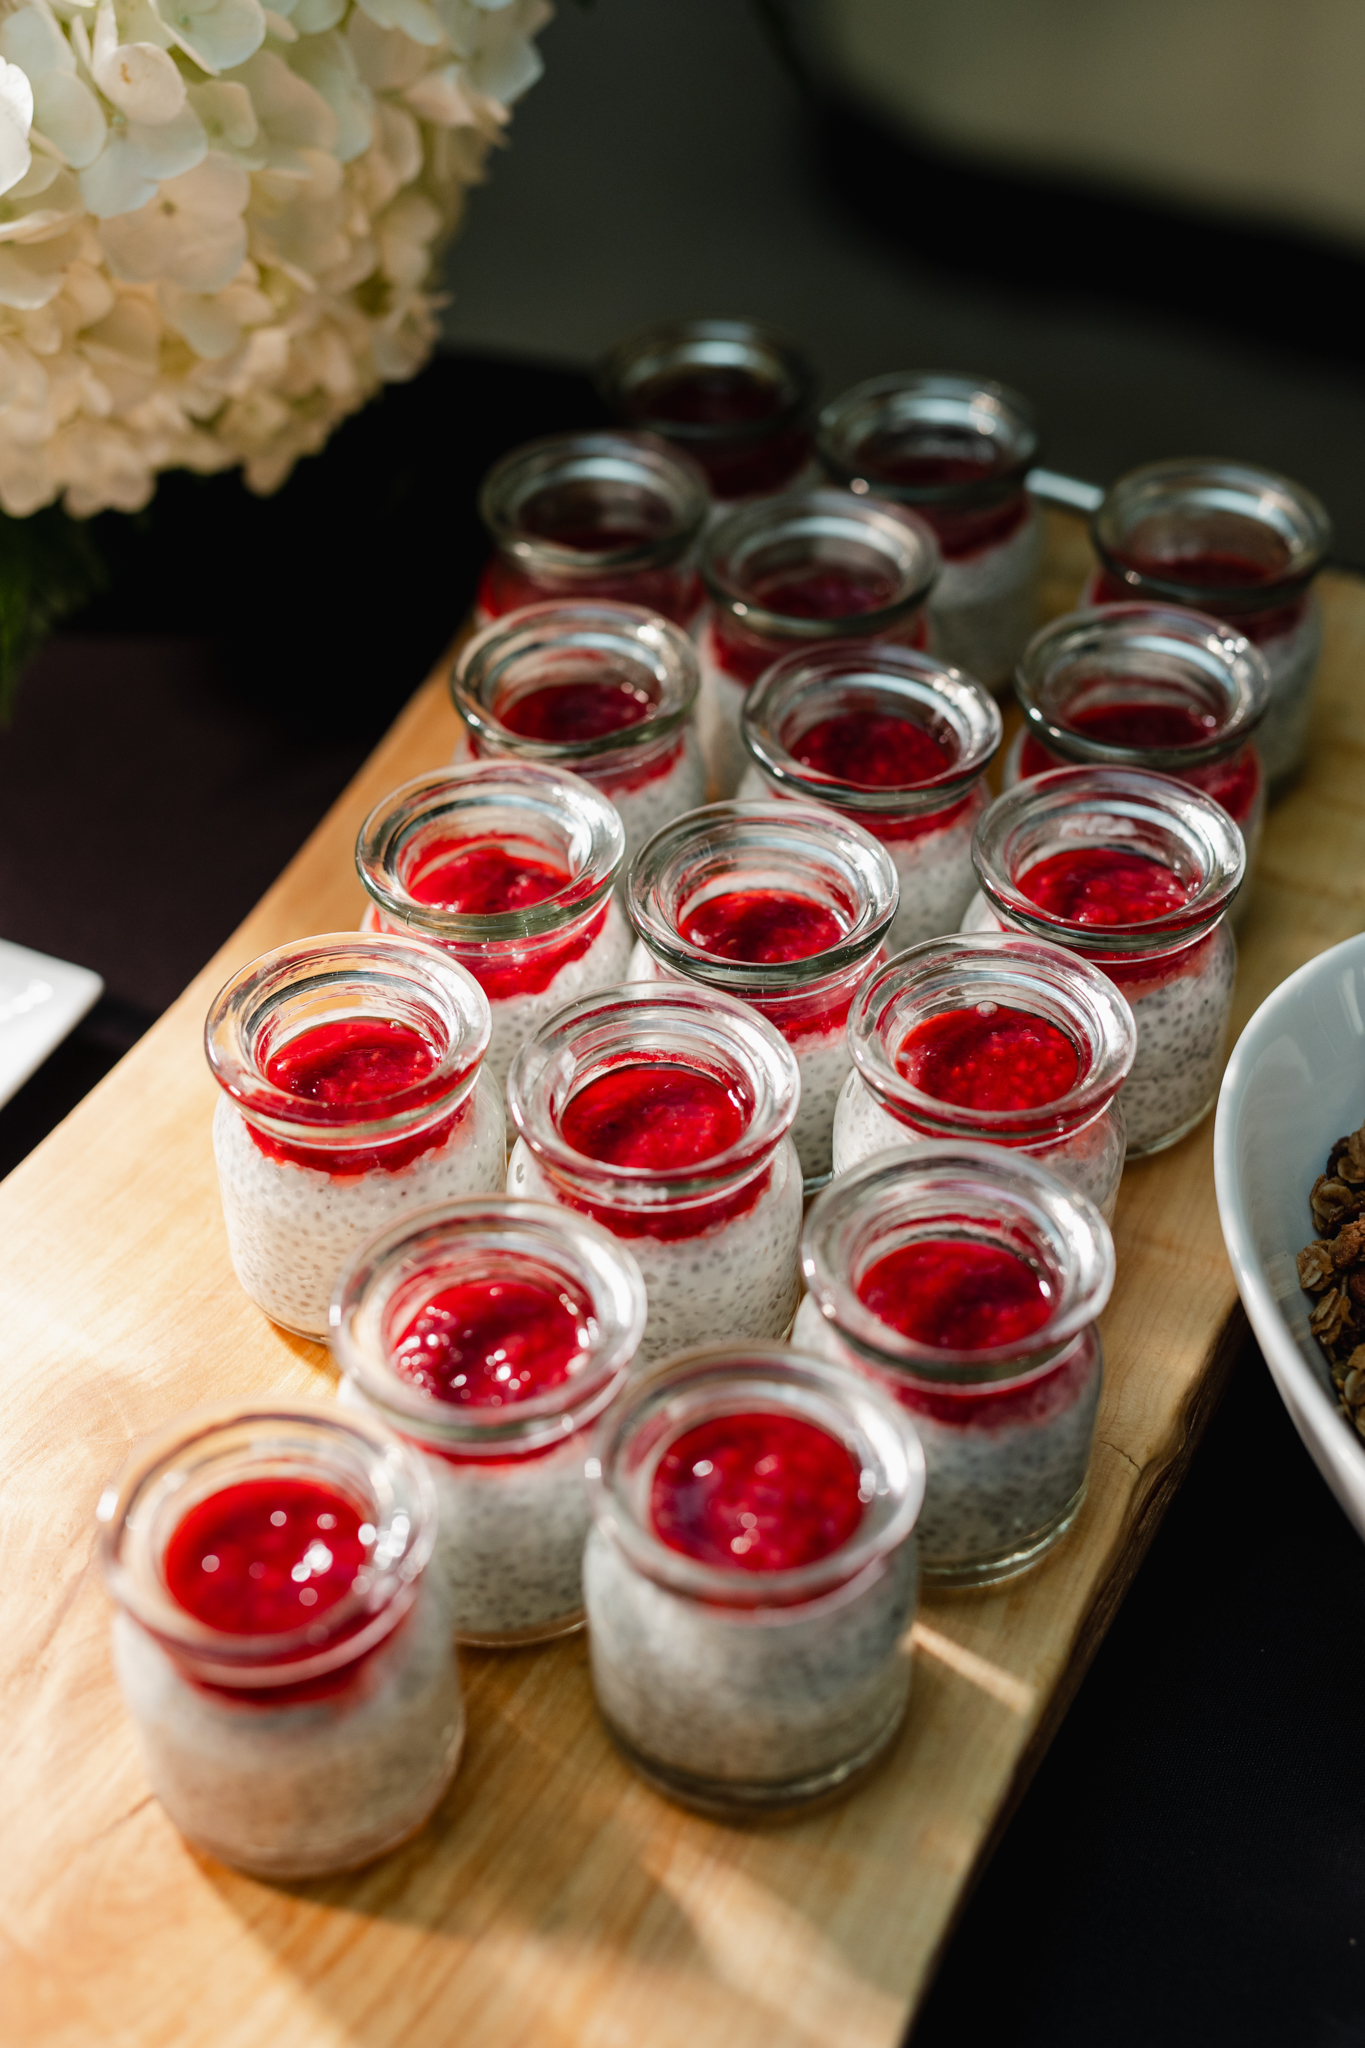 Small jars of raspberry sorbet displayed on a wooden cutting board for a conference photography session.